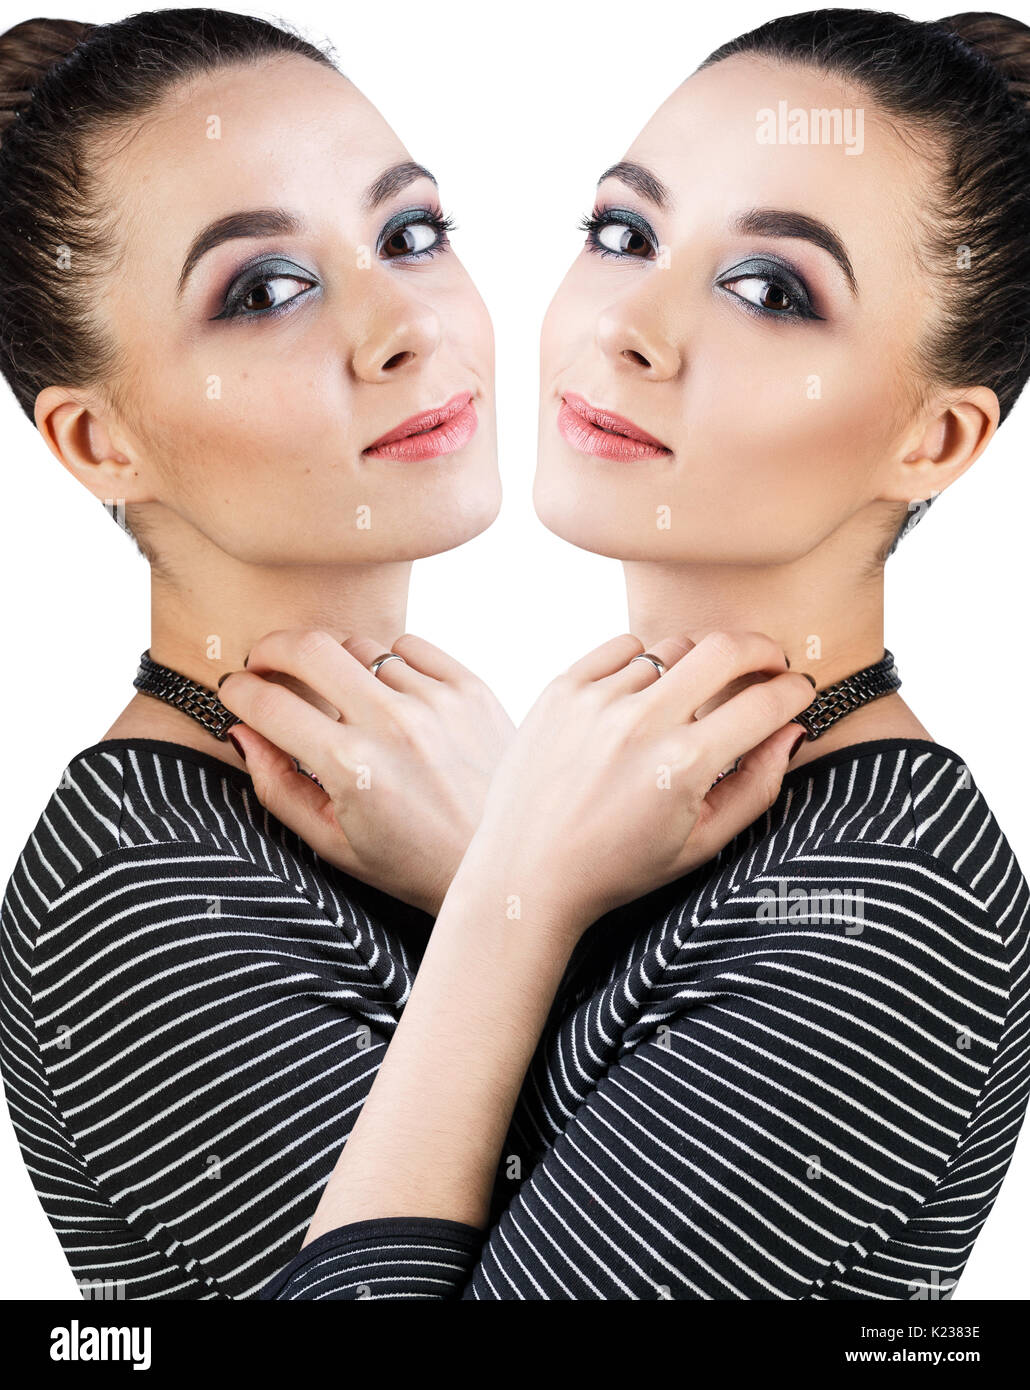 Adult woman before and after retouch. Stock Photo